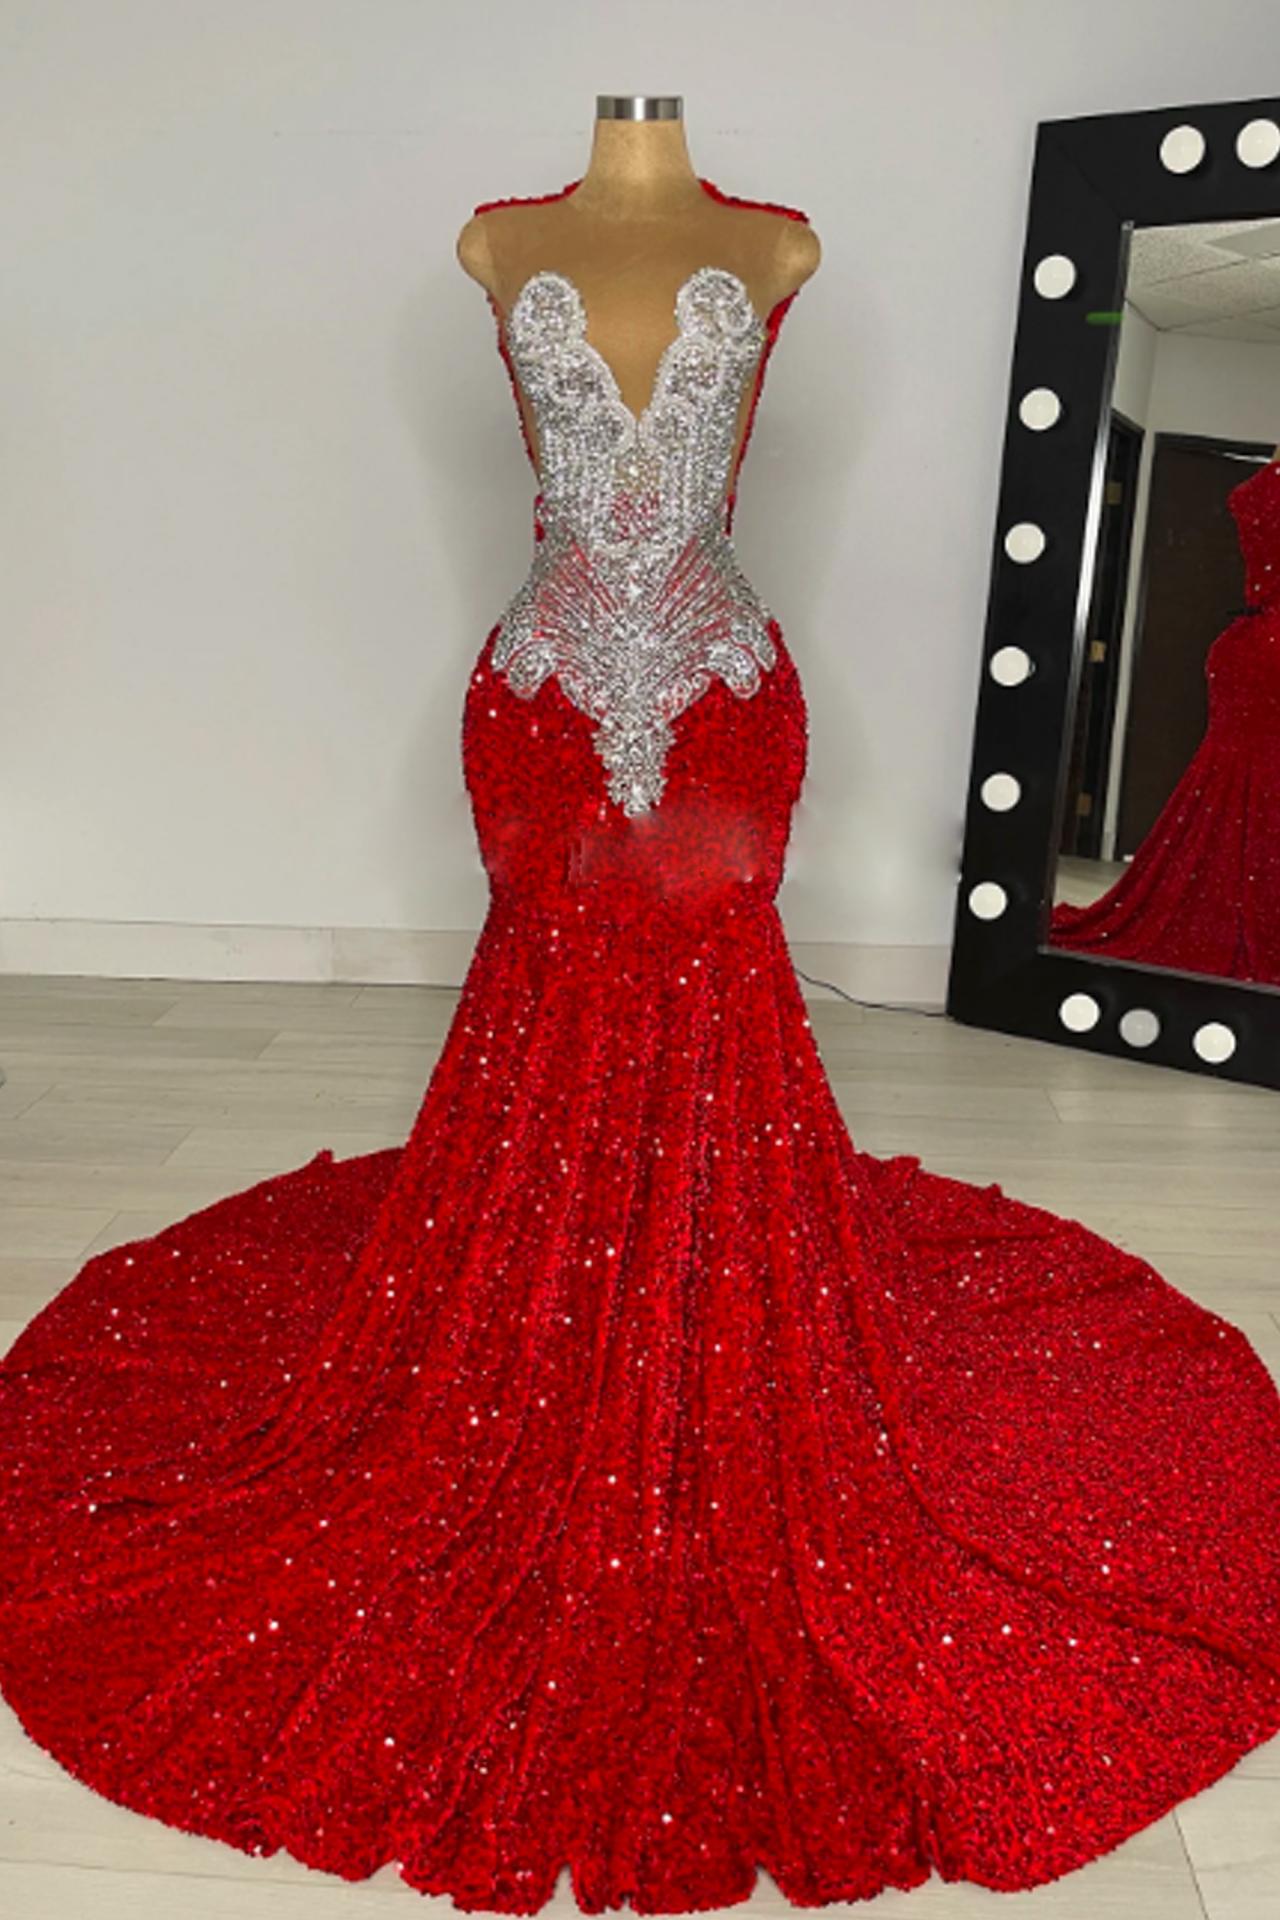 Modest Prom Dresses, Red Sequins Prom Dresses, Diamonds Fashion Party Dresses, Sparkly Evening Gown For Women, Black Girls Prom Dresses, Robes De